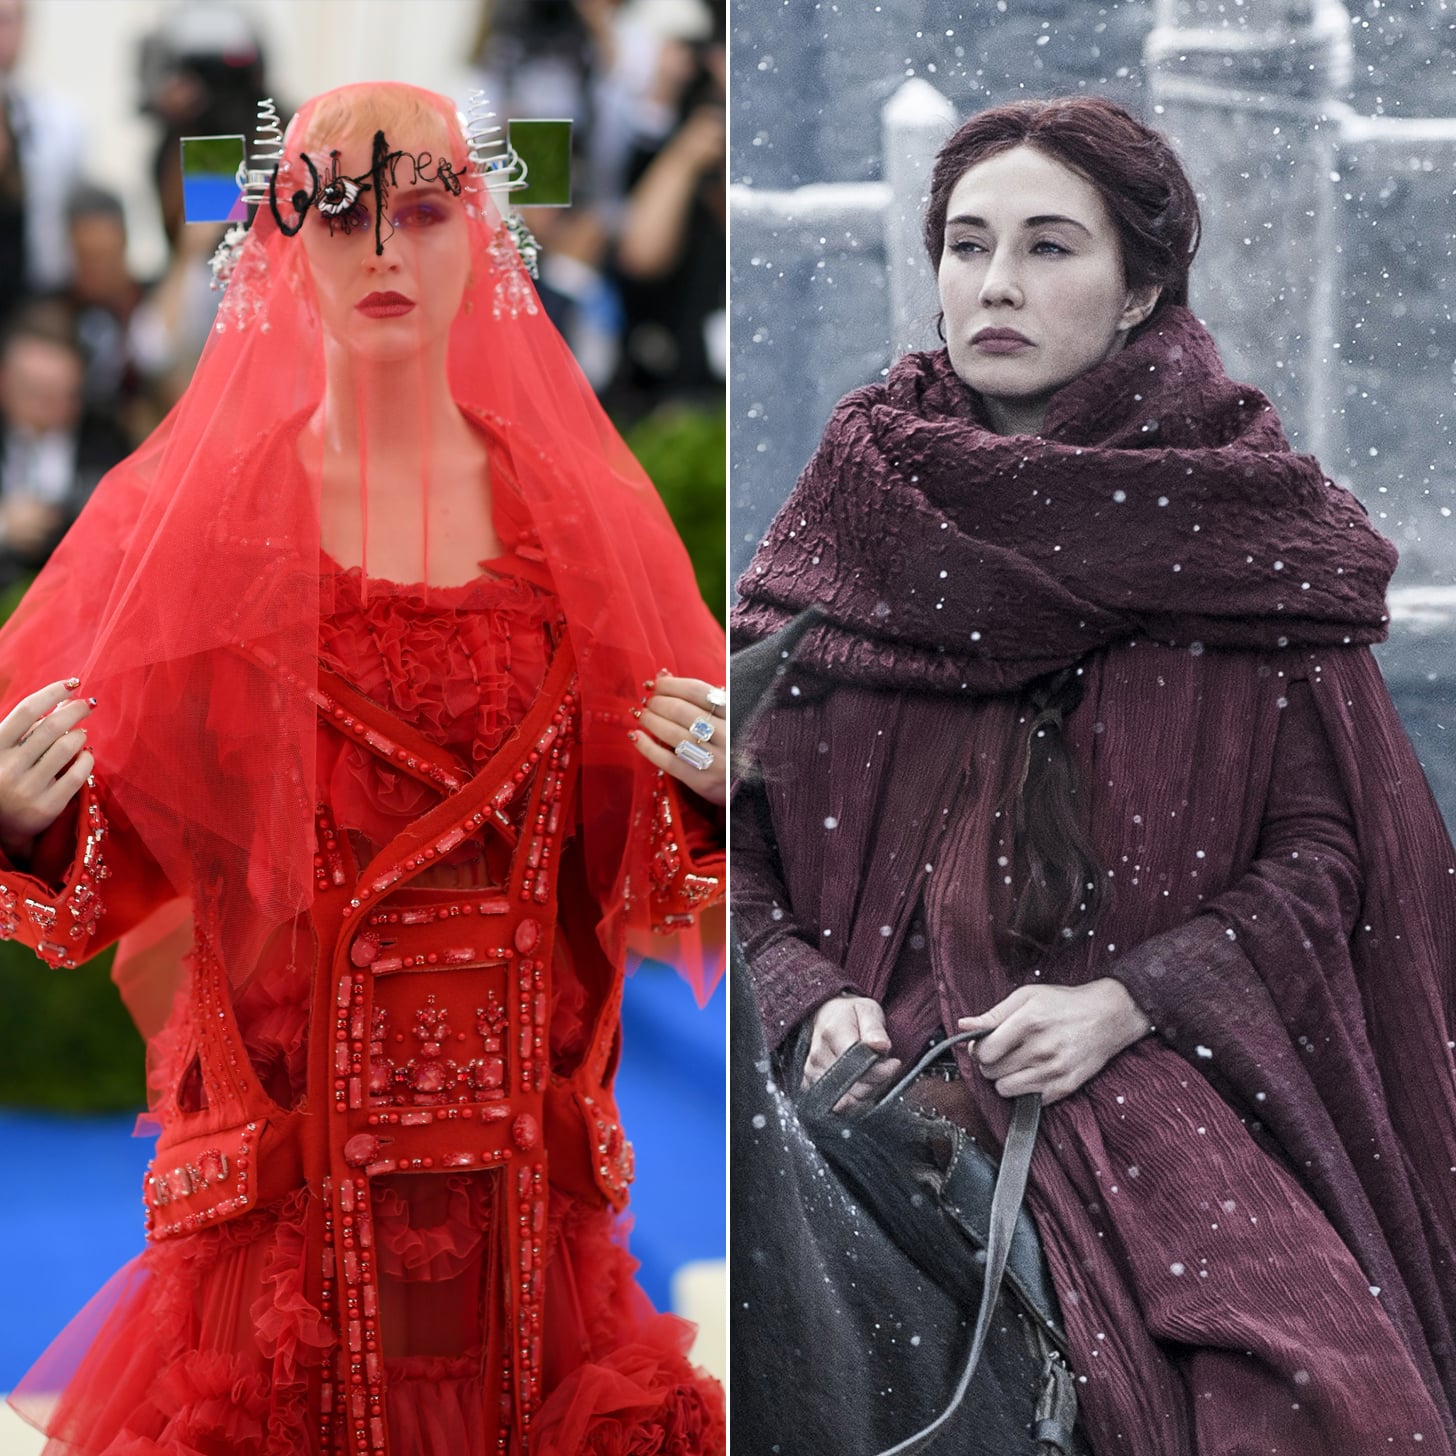 "The Red Woman" from Game of Thrones | Lydia Deetz and 6 Other Things Katy Perry Definitely Looked Like the Met Gala | POPSUGAR Fashion Photo 2